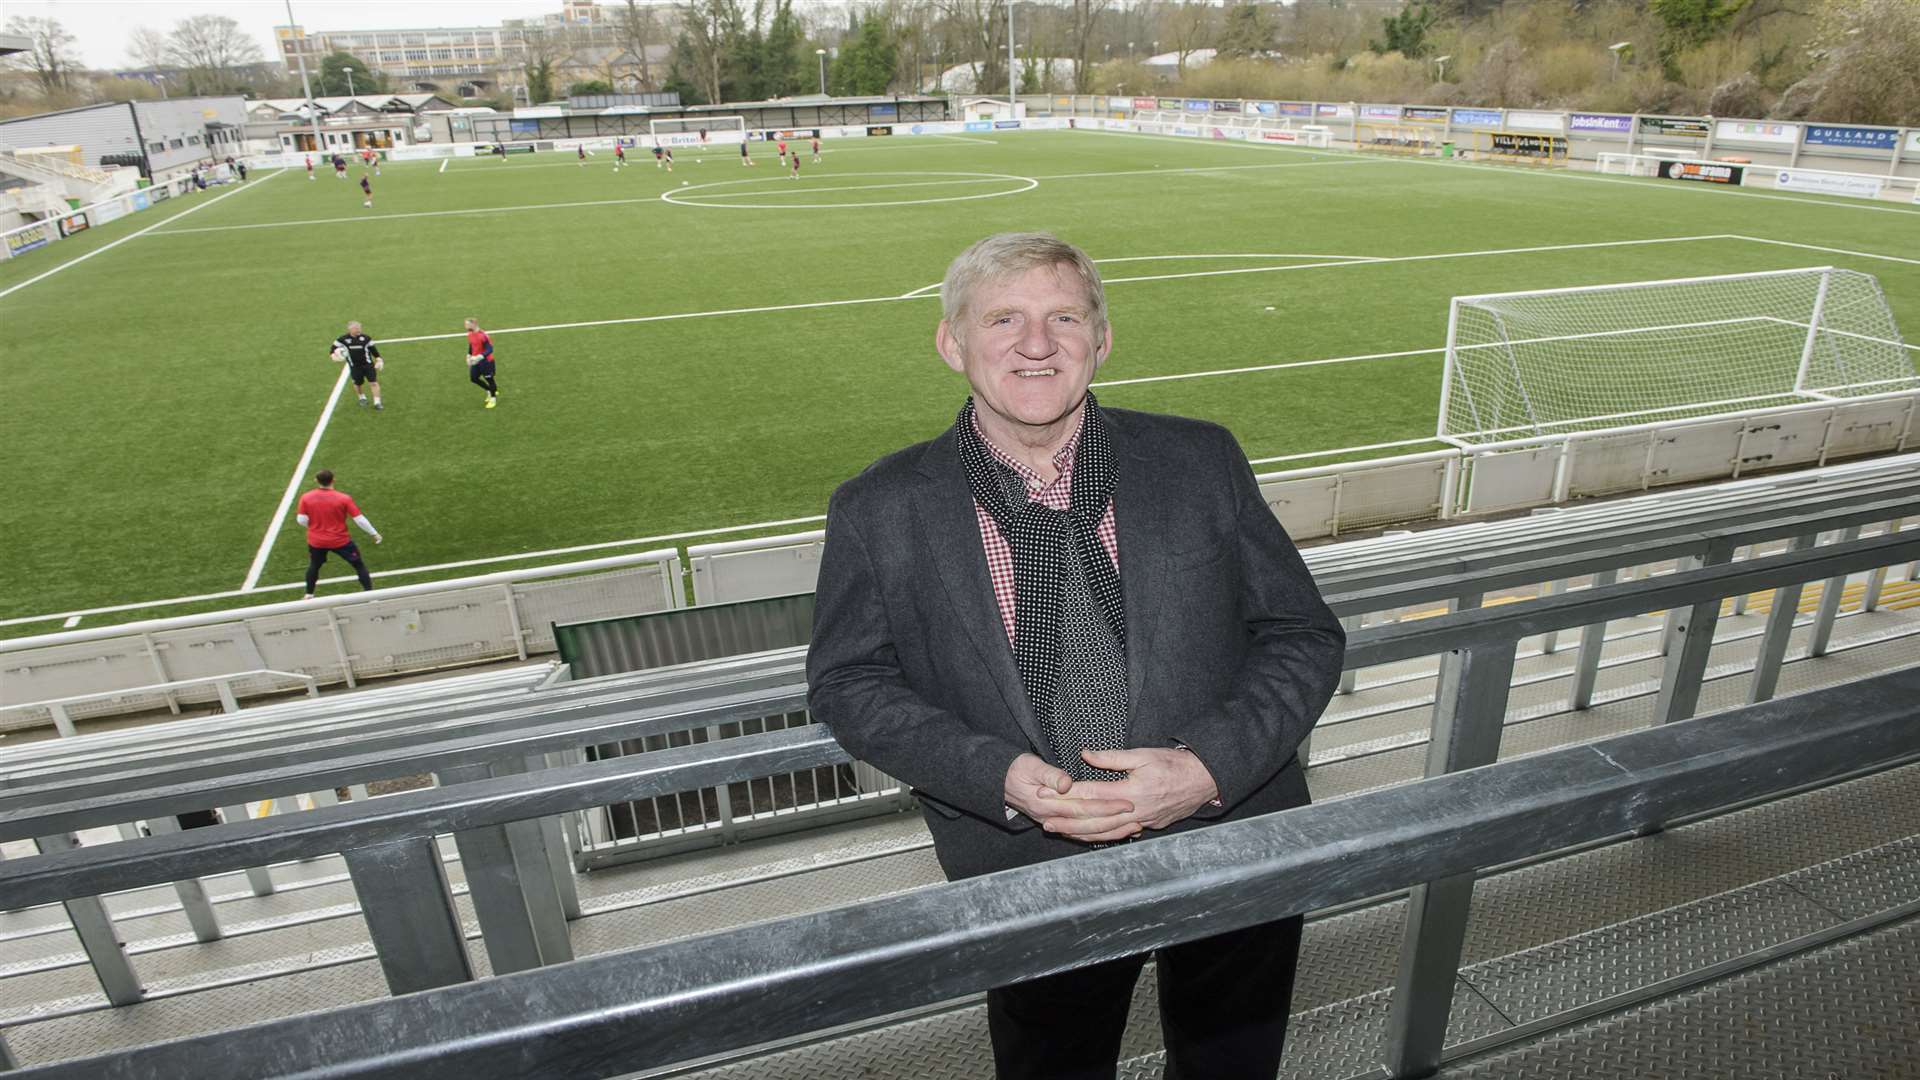 The new stand at the Gallagher offers great views Picture: Andy Payton